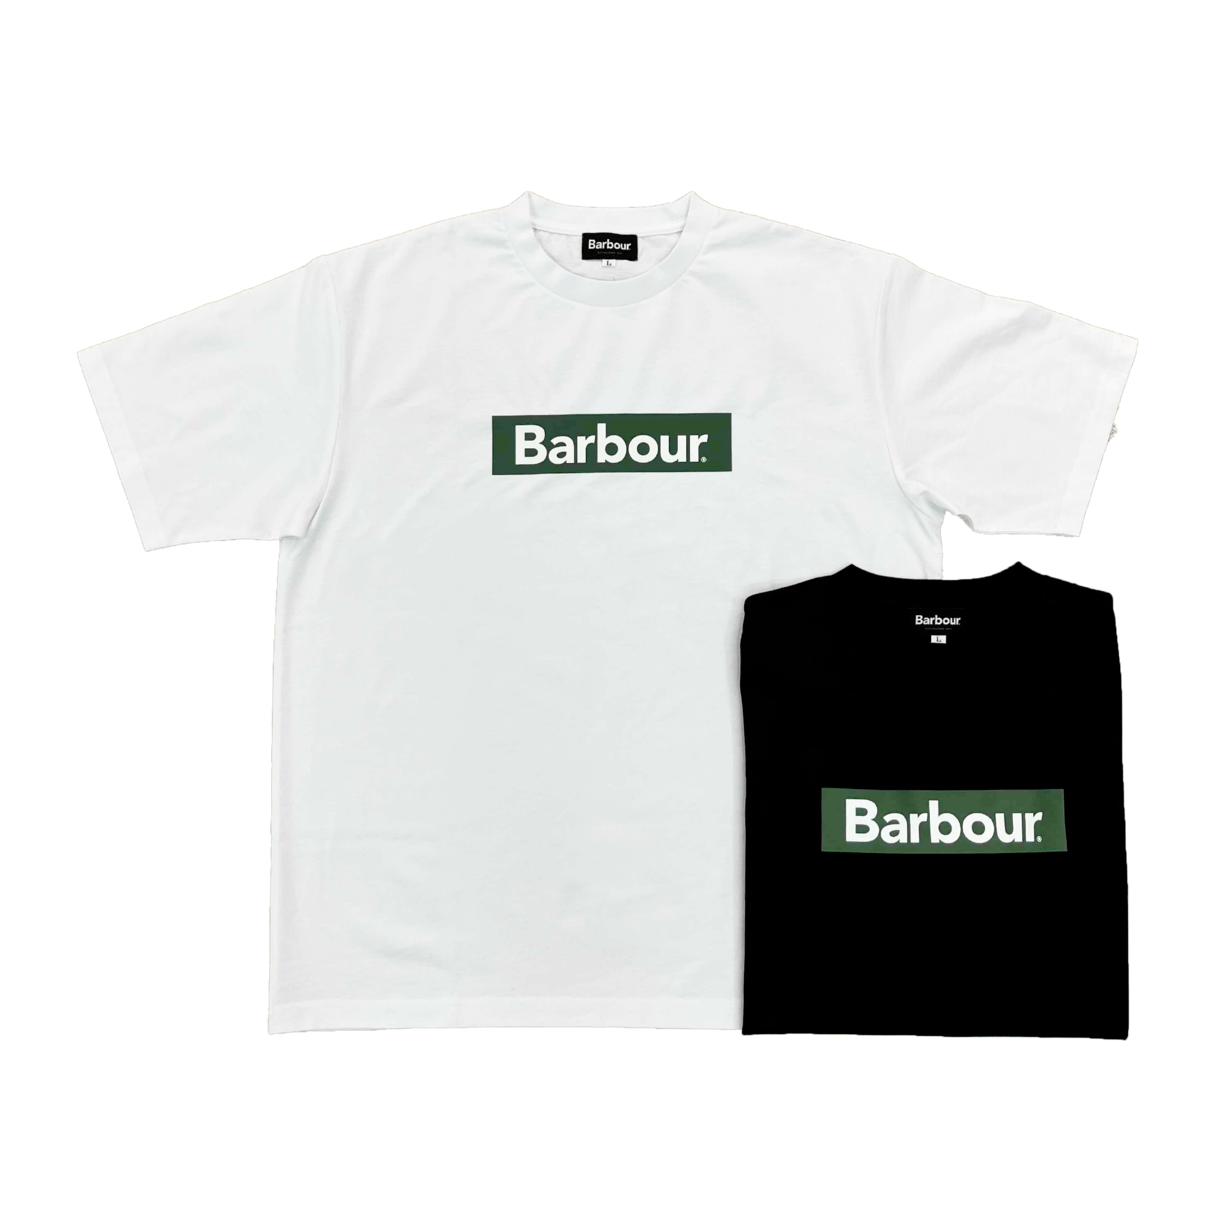 Barbour バブアー 名古屋 直営店 ロゴTシャツ